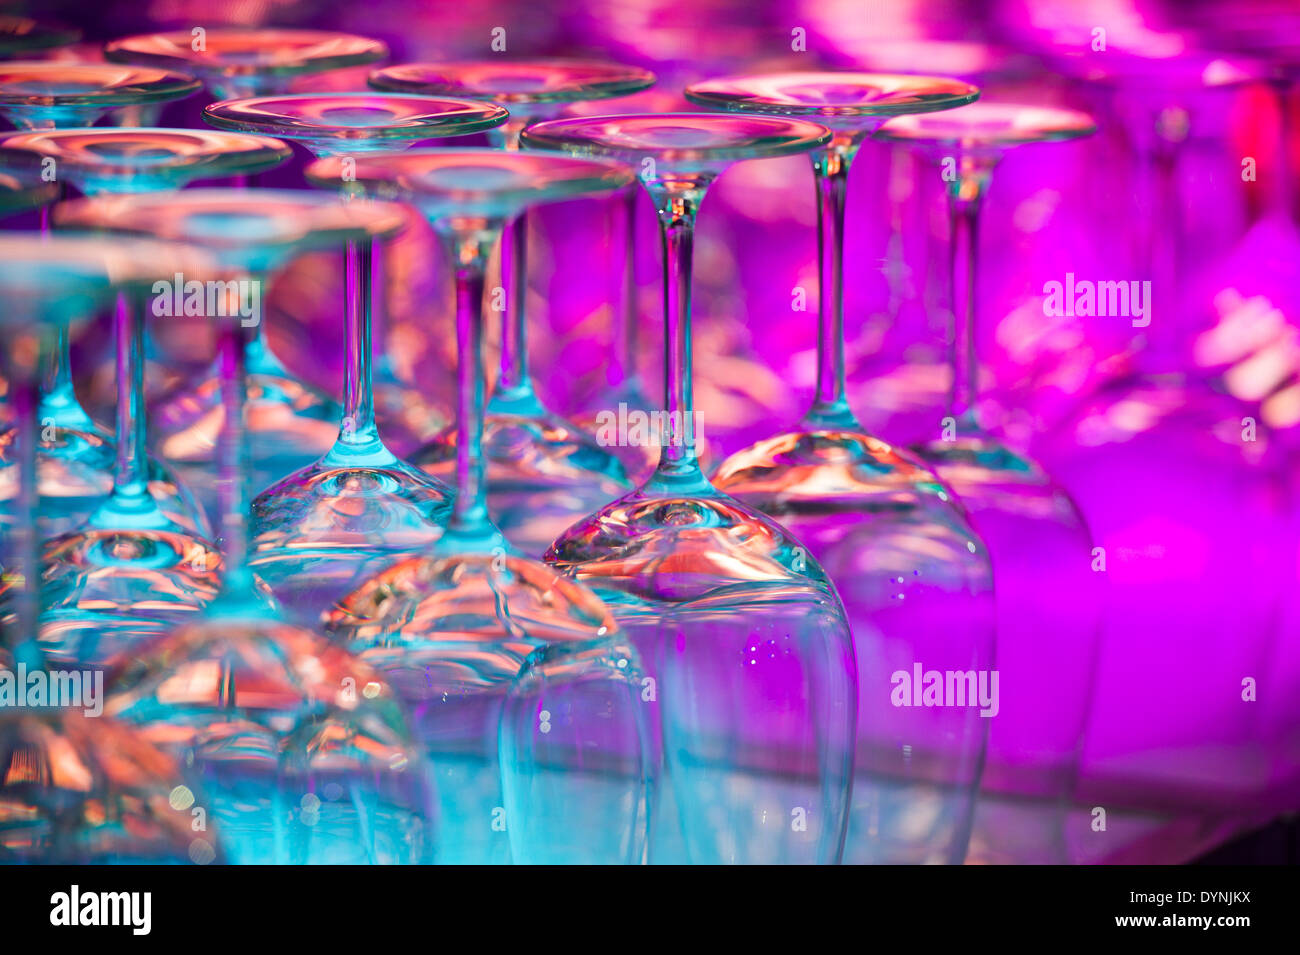 Wine glasses on a shelf with colored lights in Baltimore, Maryland Stock Photo